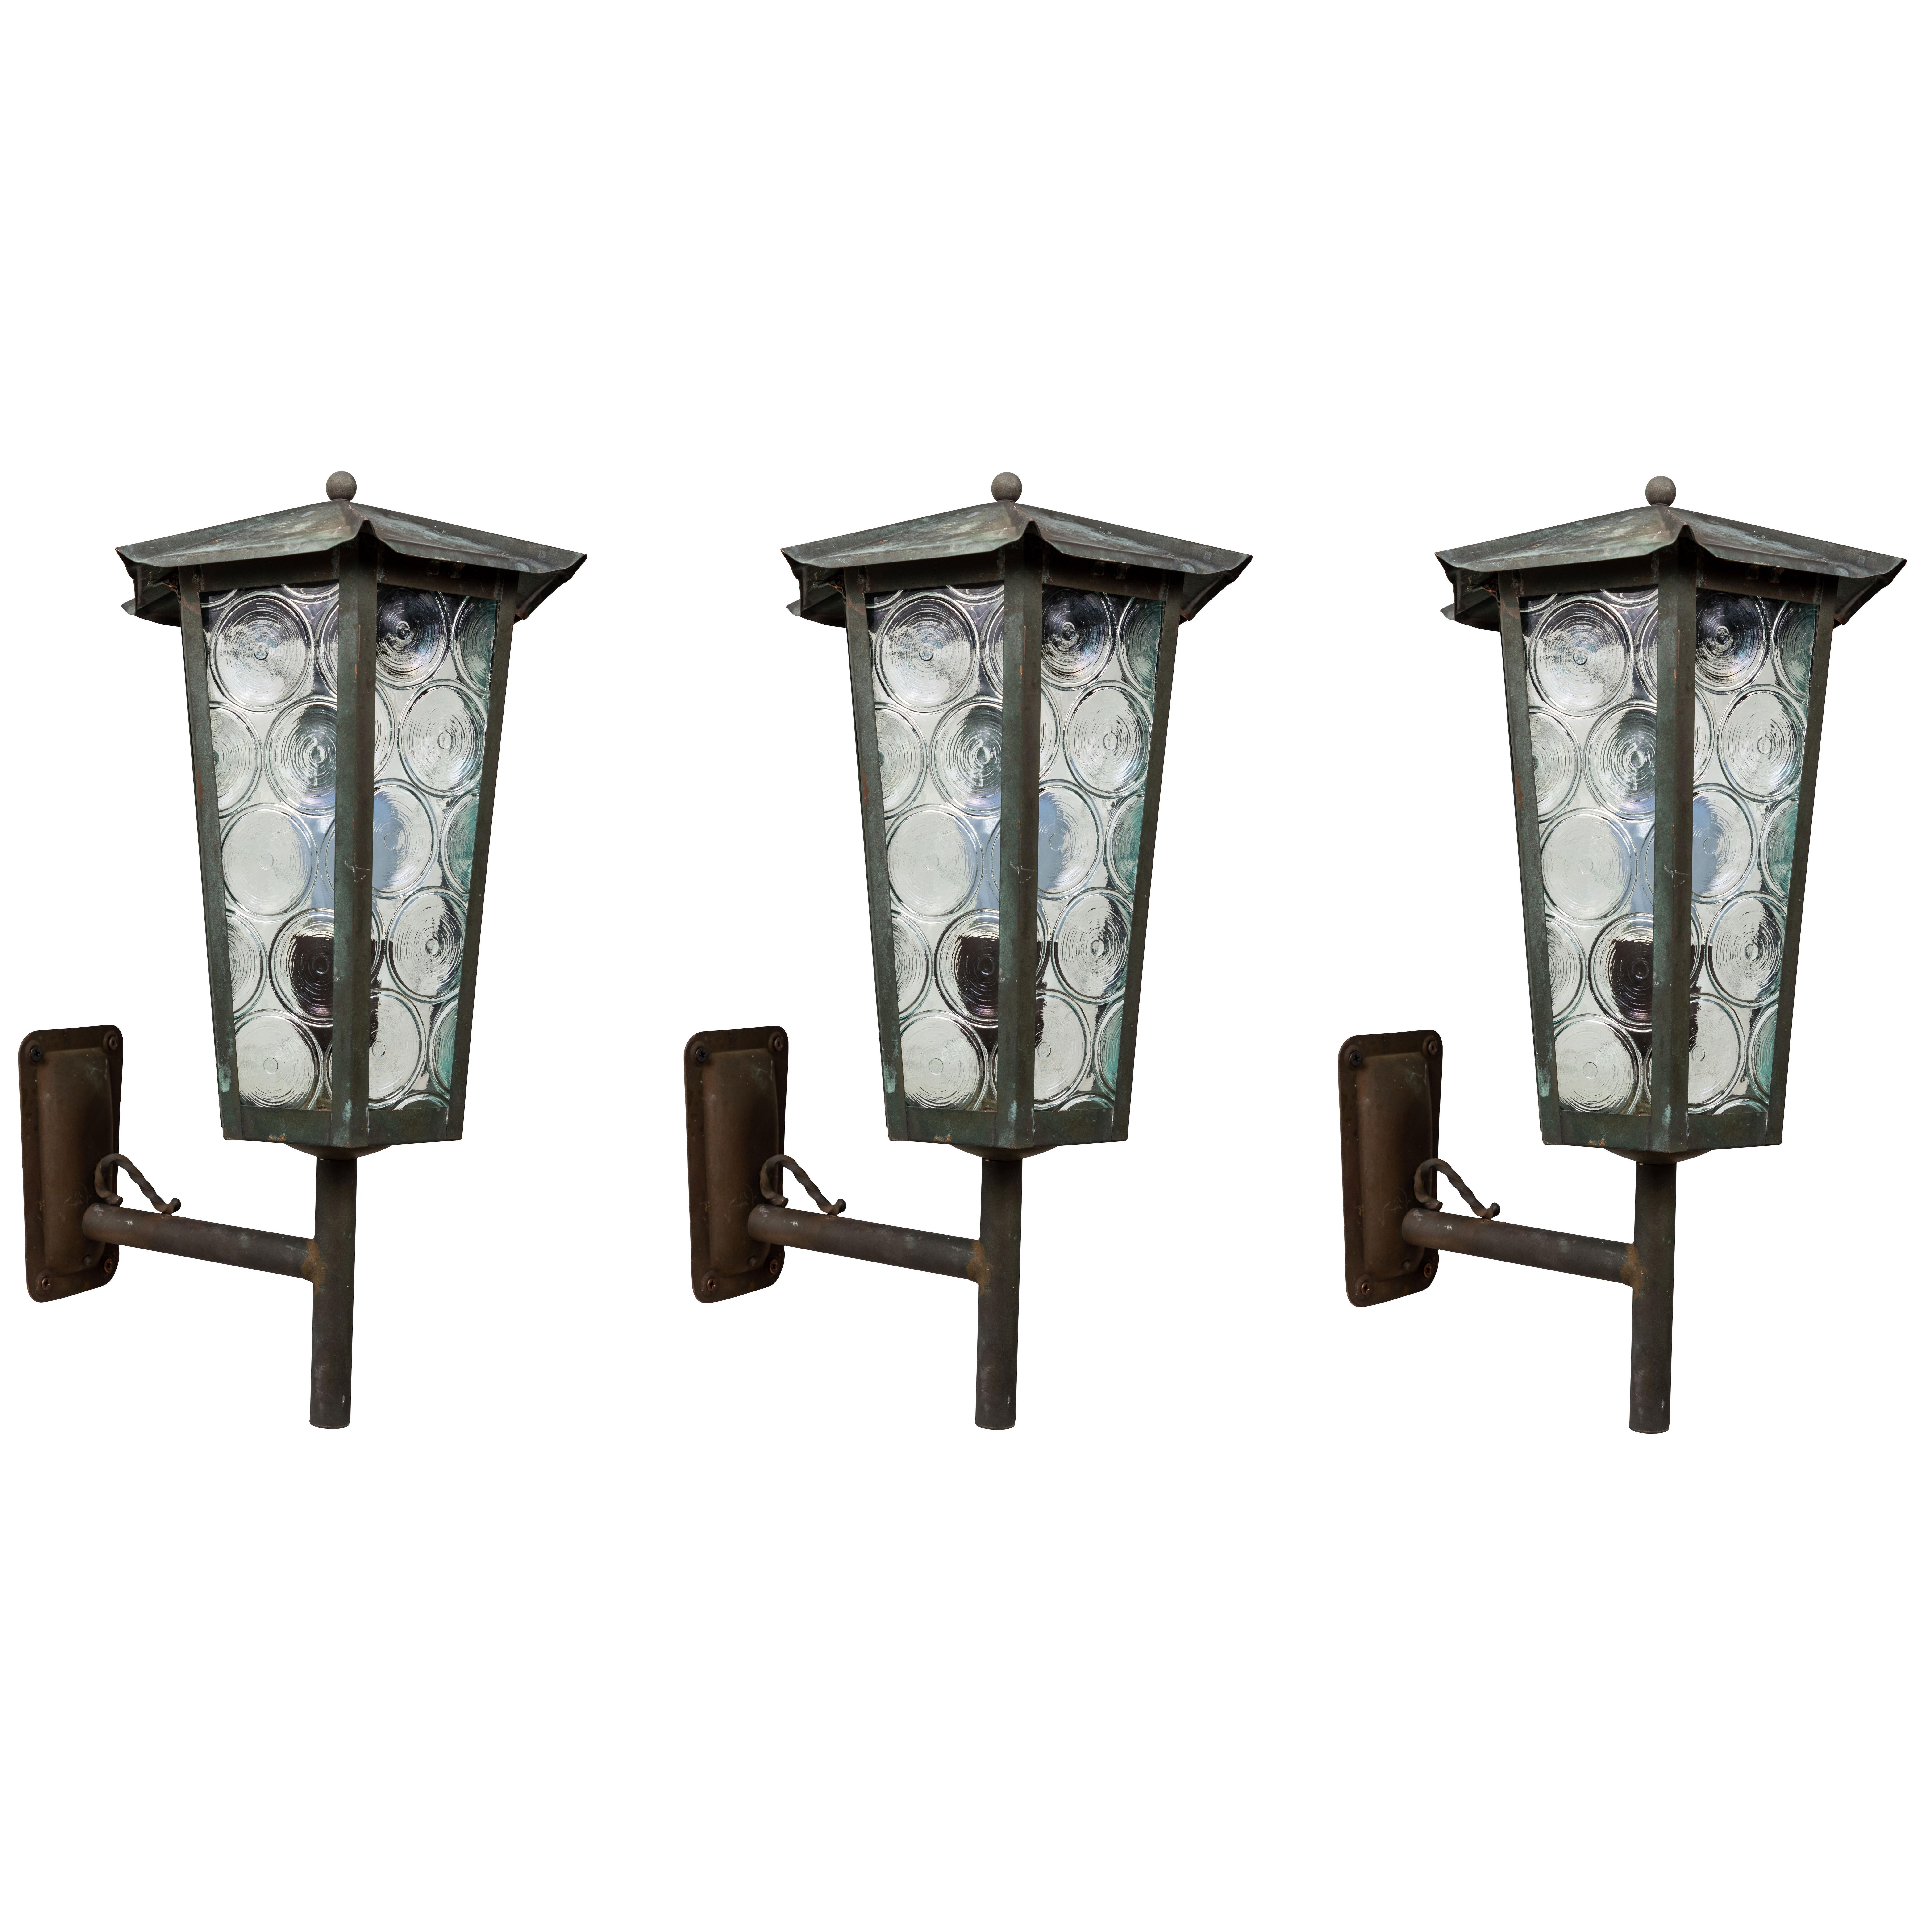 1950s Large Scandinavian Outdoor Wall Lights in Patinated Copper and Glass